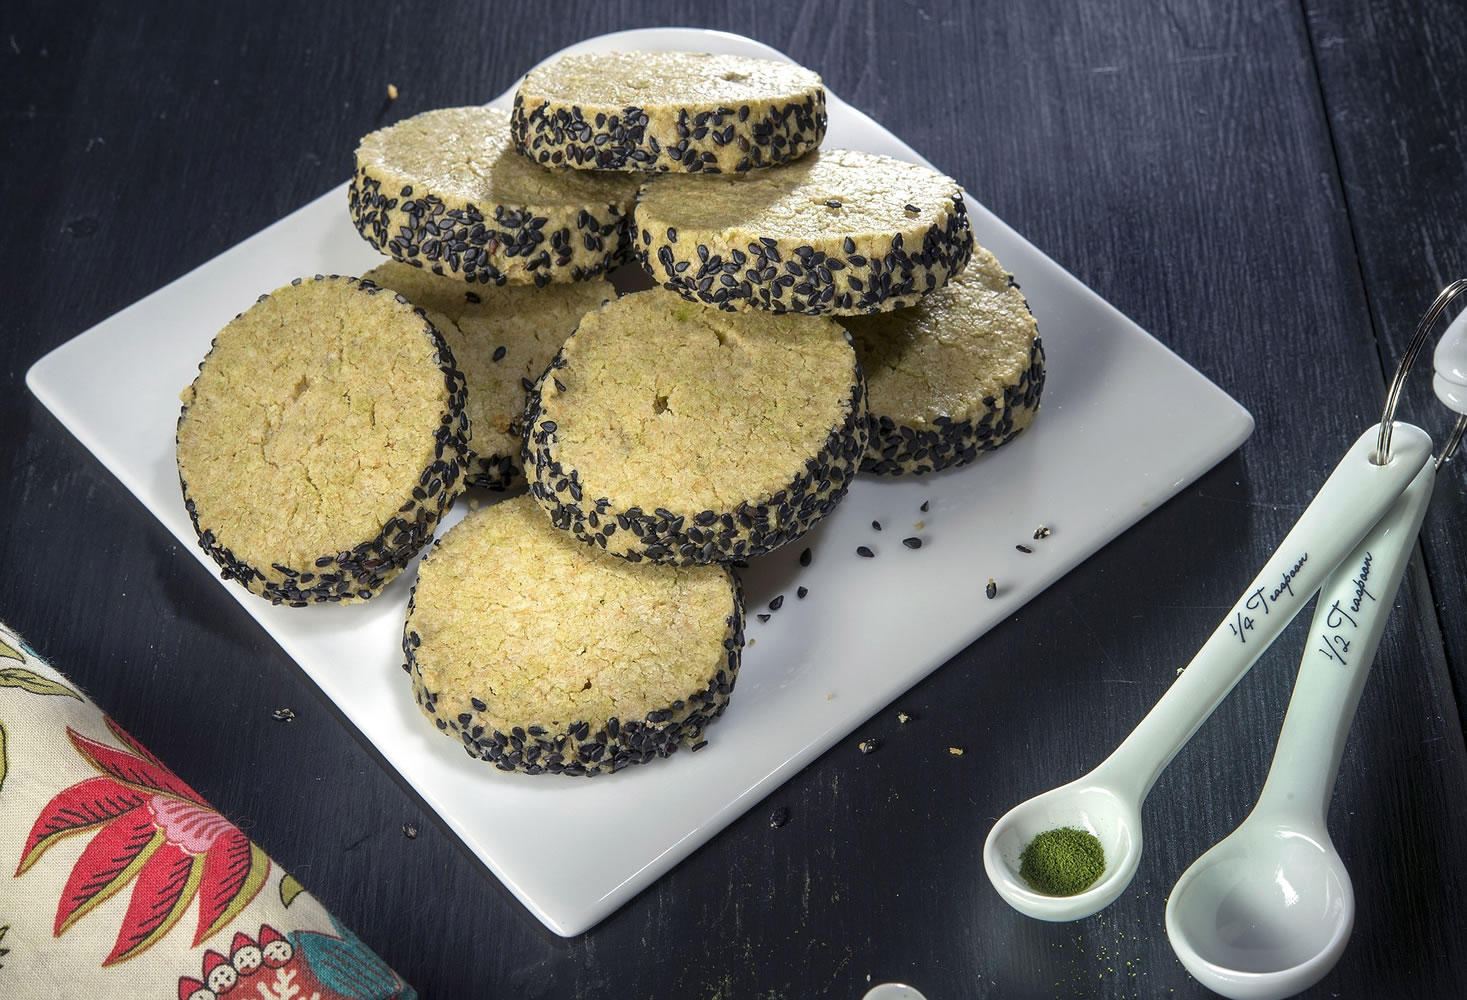 Green Tea Sesame Shortbread Cookie, from a recipe in &quot;Steeped: Recipes Infused With Tea,&quot; by Annelies Zijderveld.